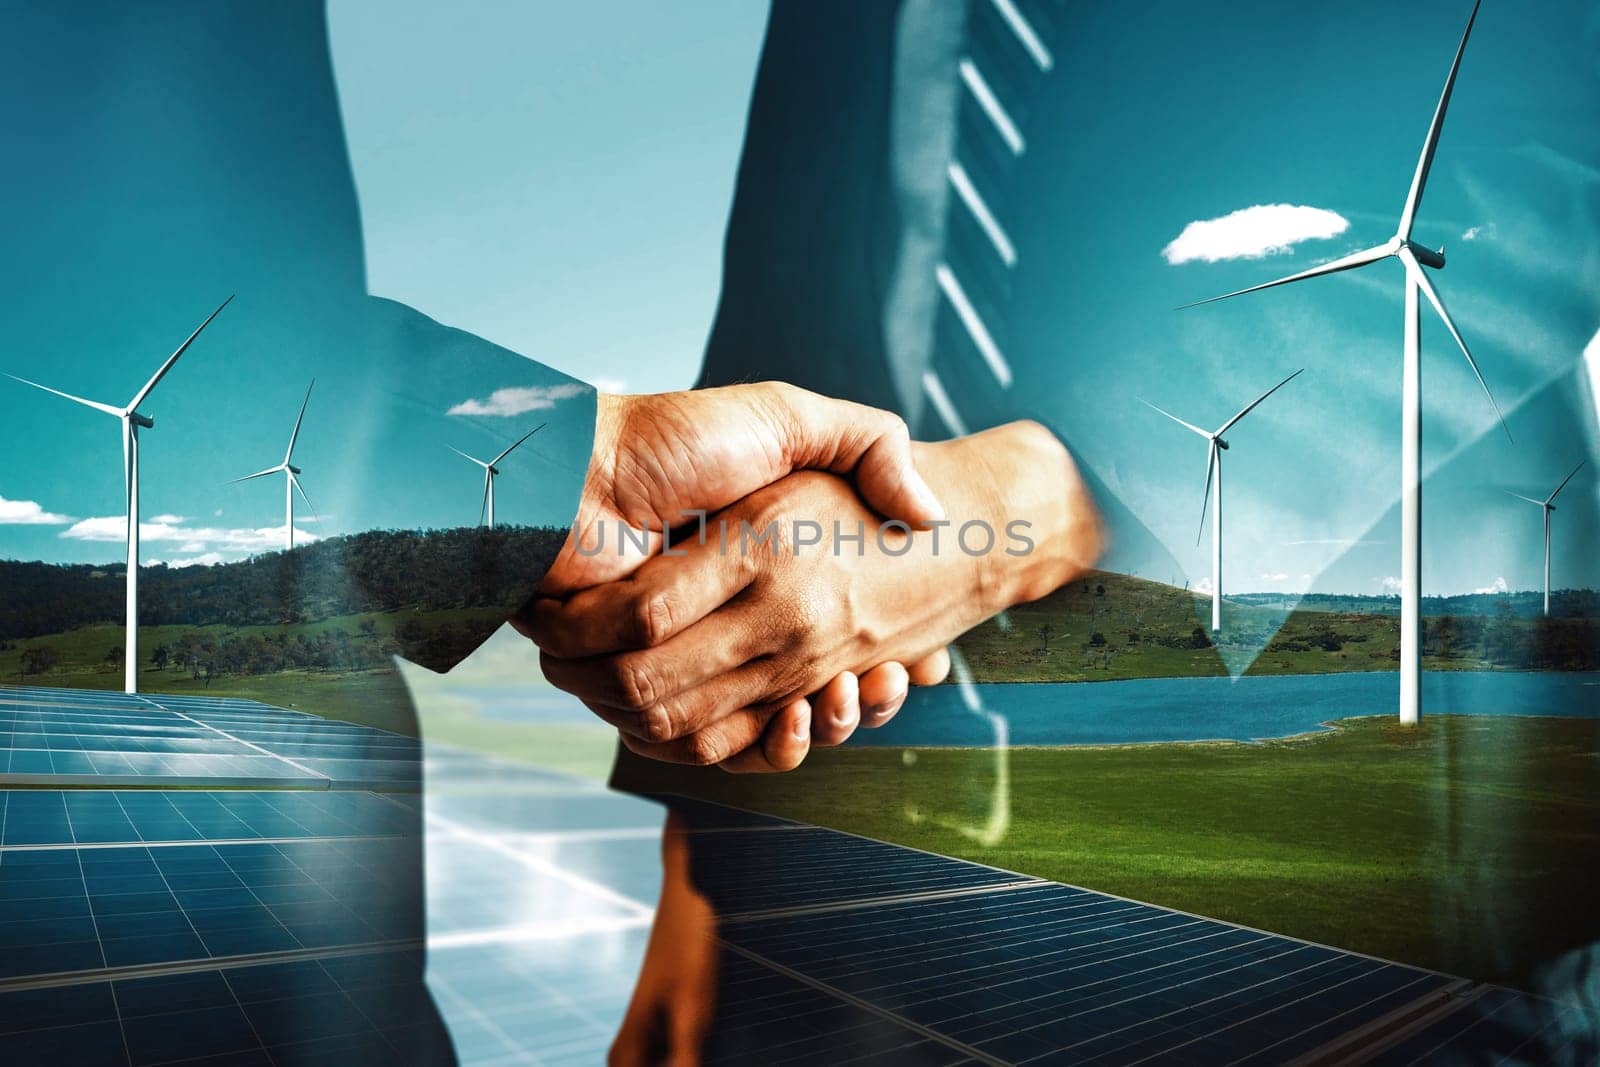 Double exposure graphic of business people handshake over wind turbine farm and green renewable energy worker interface. Concept of sustainability development by alternative energy. uds